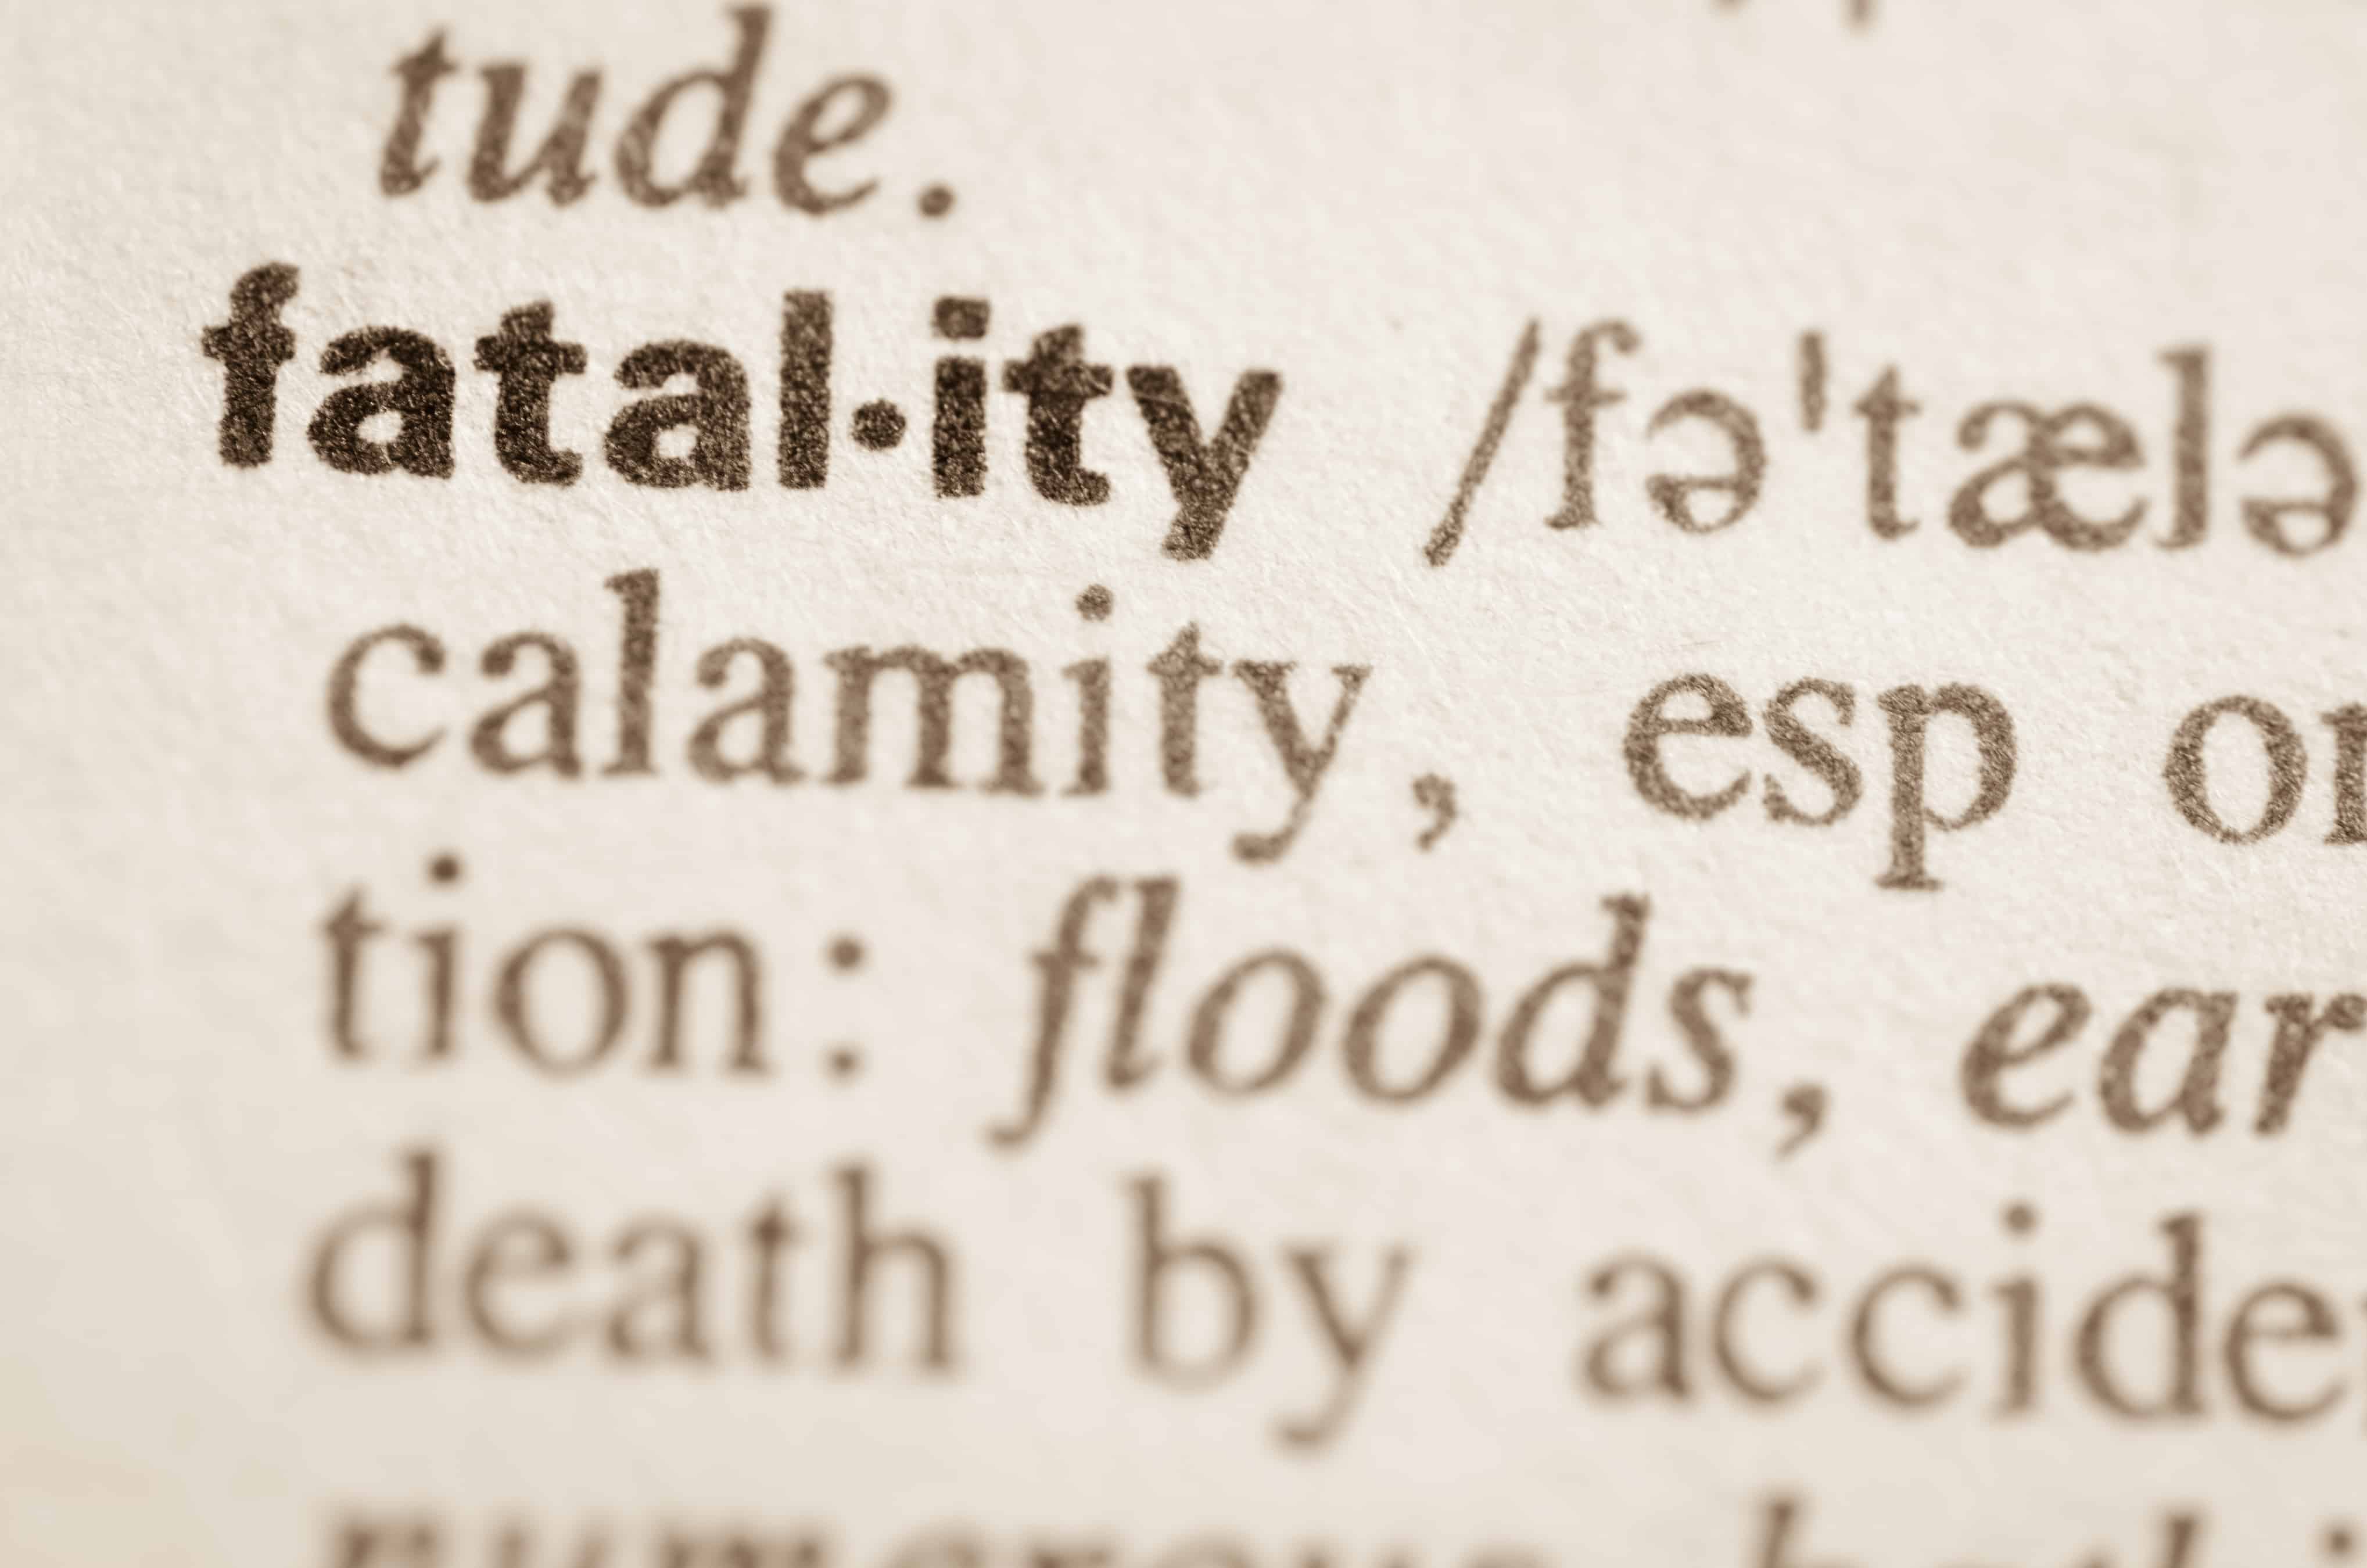 Fatality and significant injury